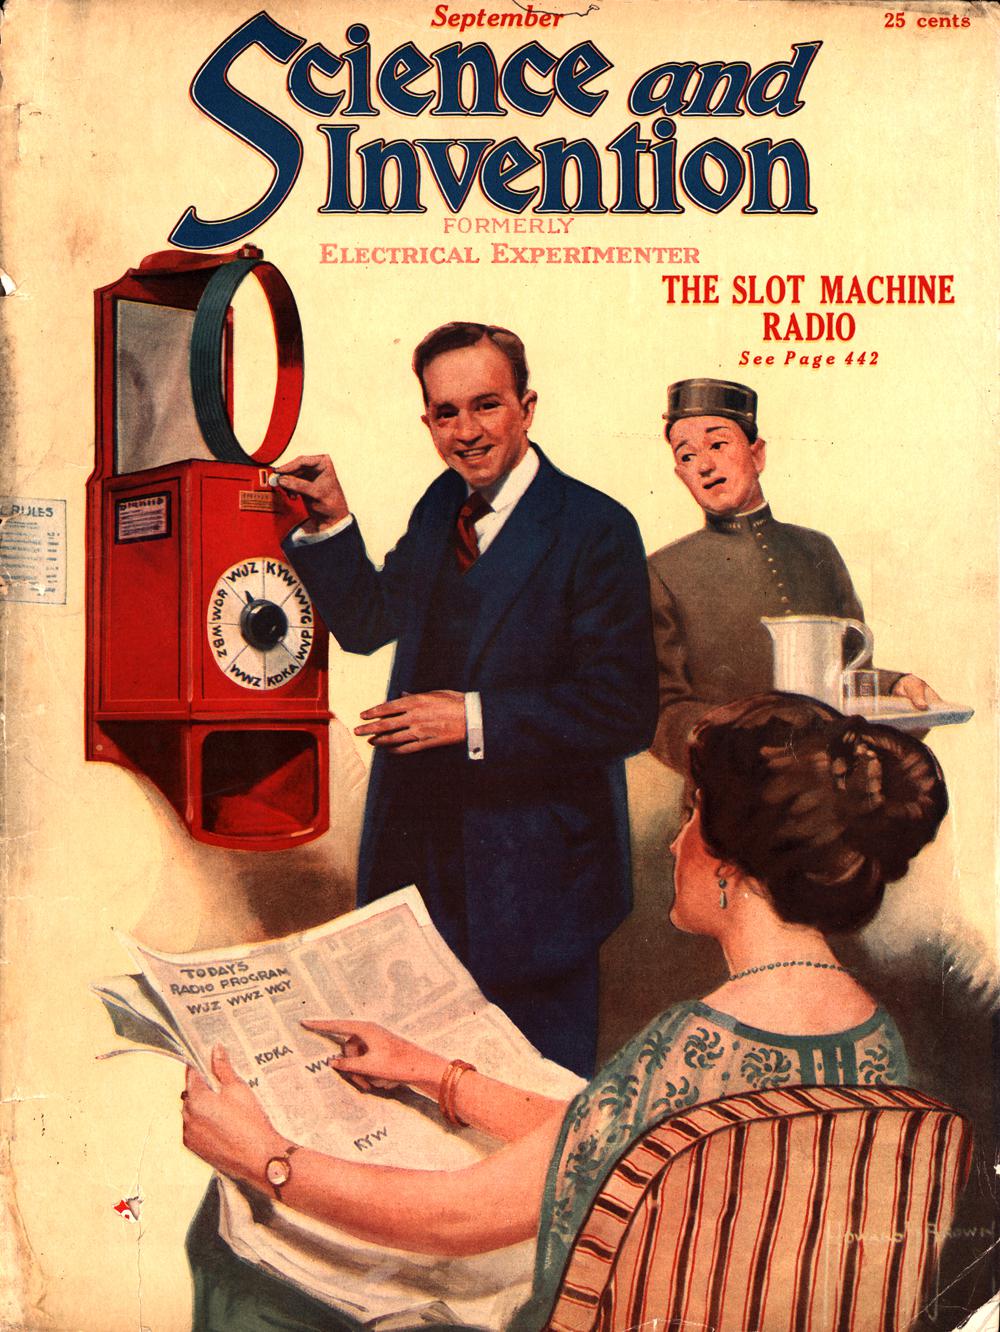 1922 - Science and invention - Vol. 10, No. 5